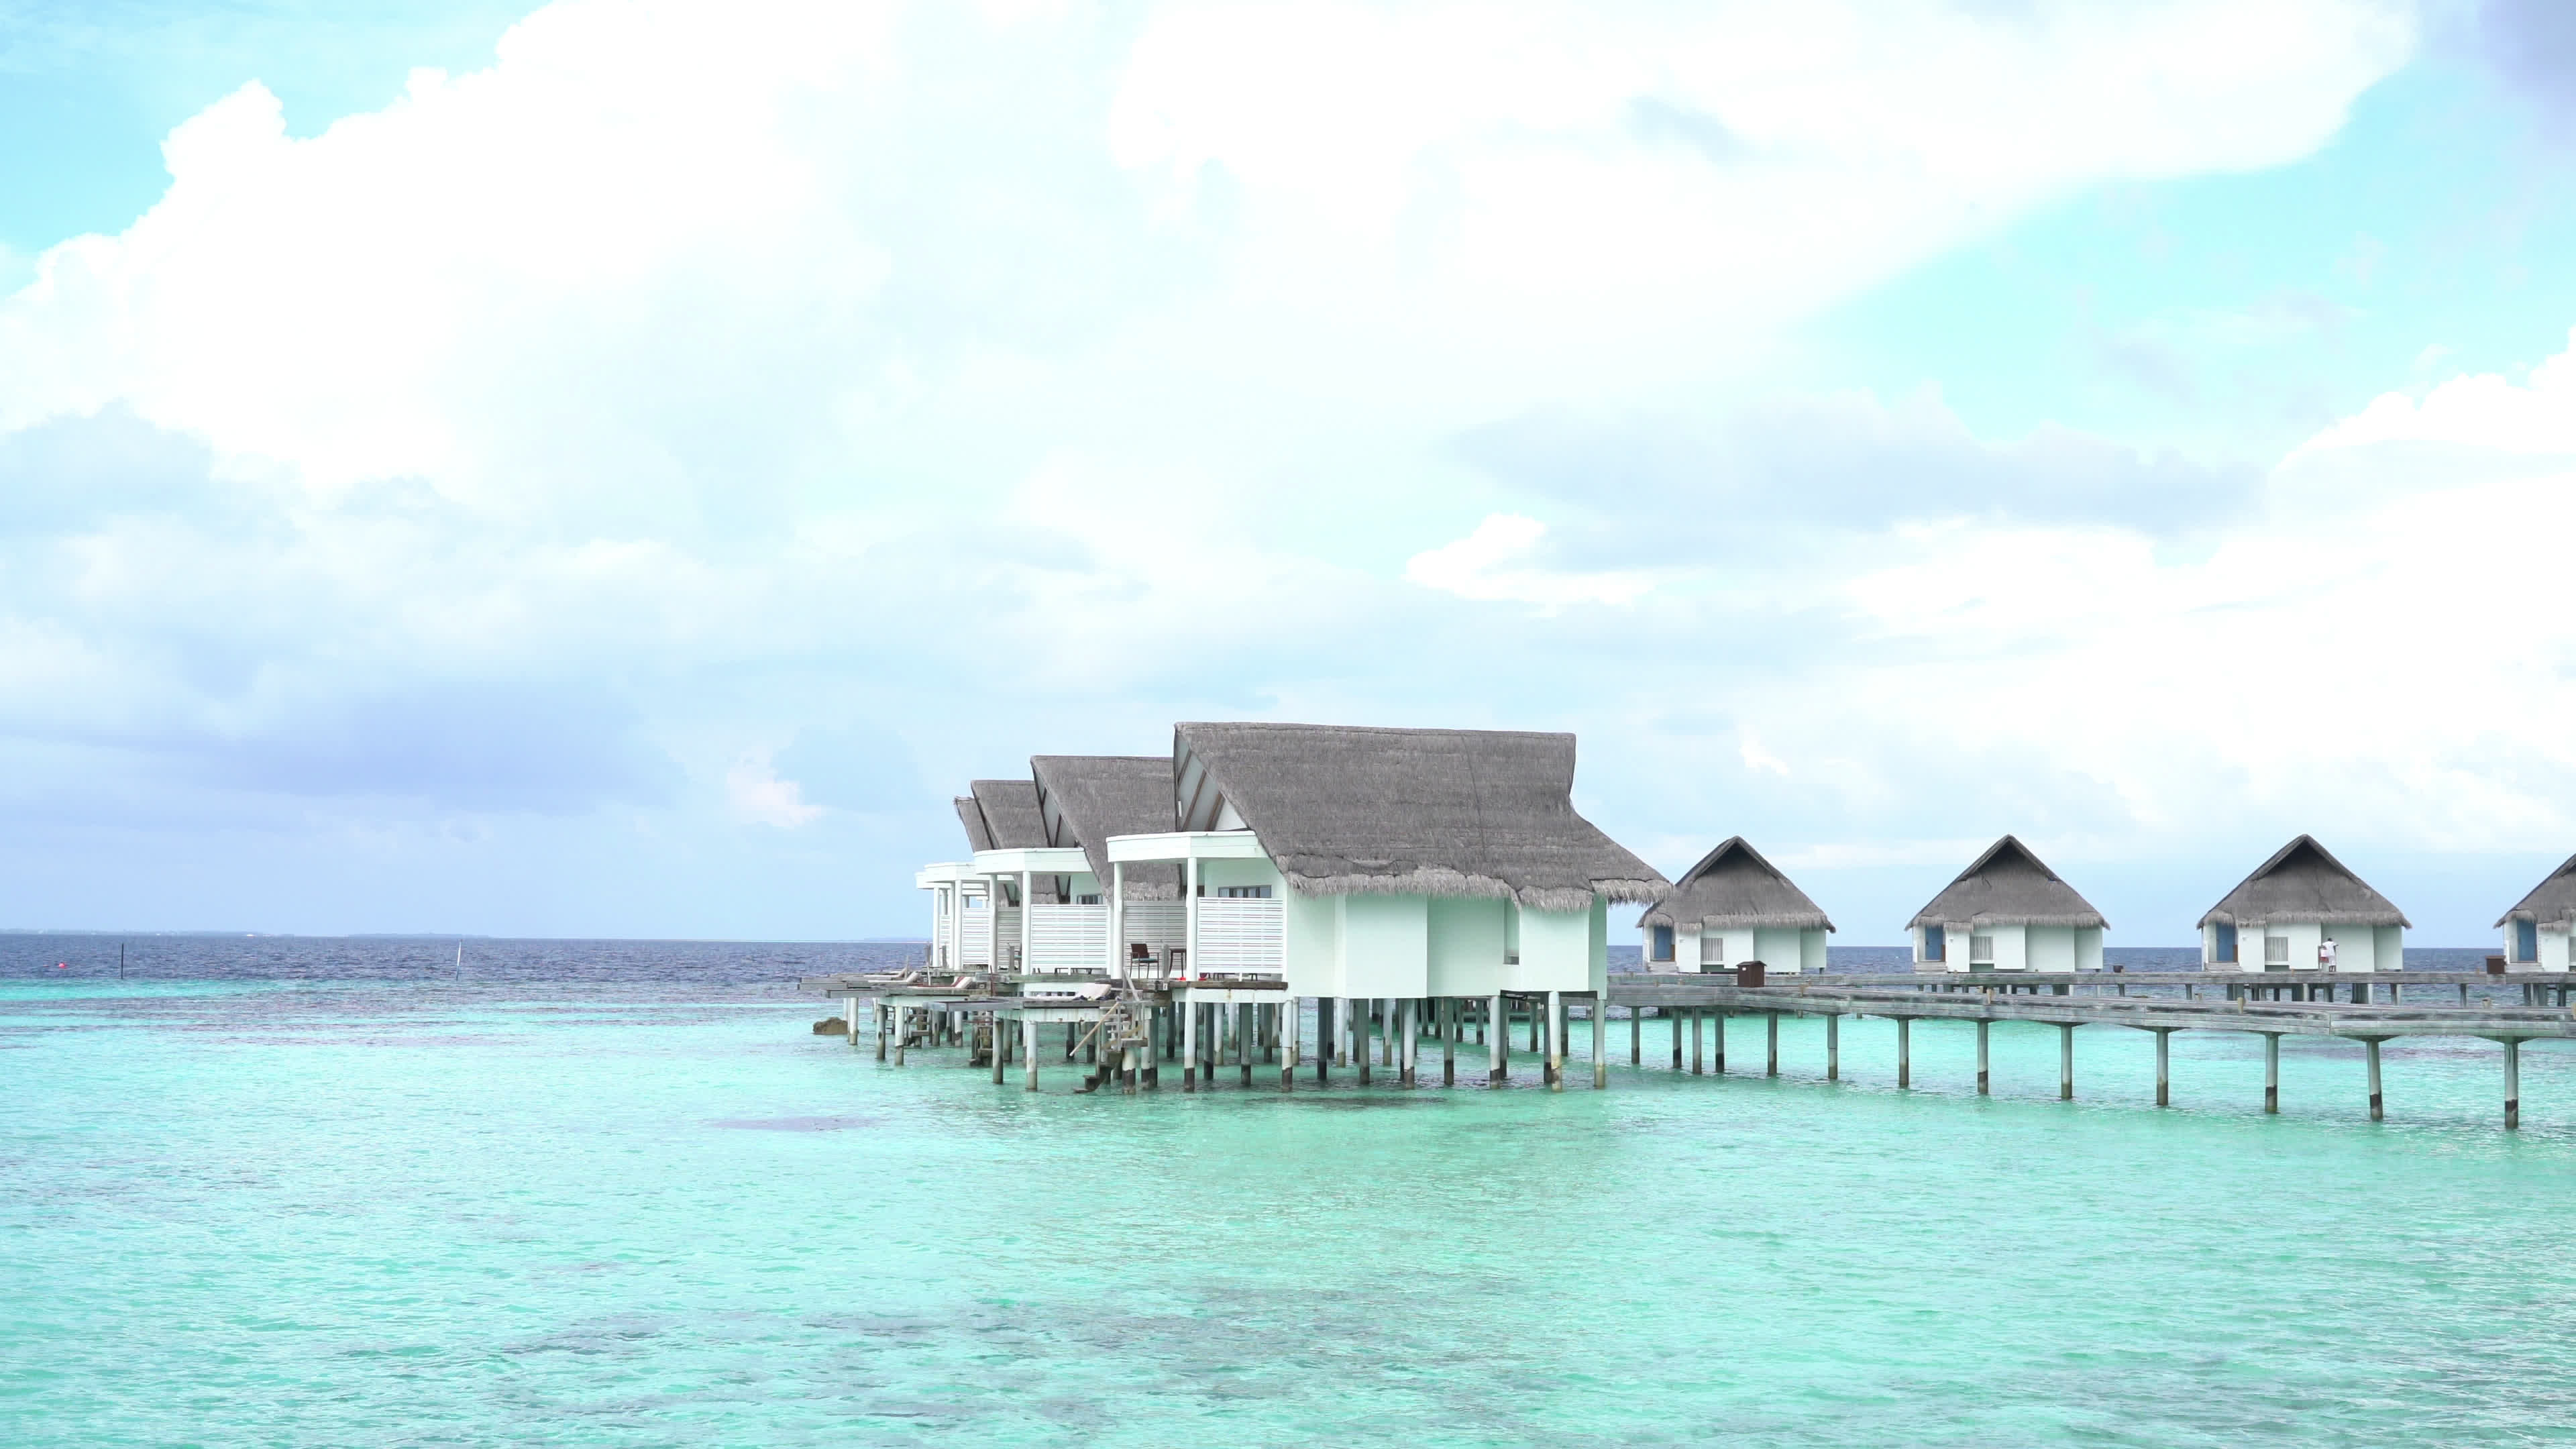 Bungalow: Tropical beach and ocean coast in Maldives, Amazing place for vacation. 3840x2160 4K Wallpaper.